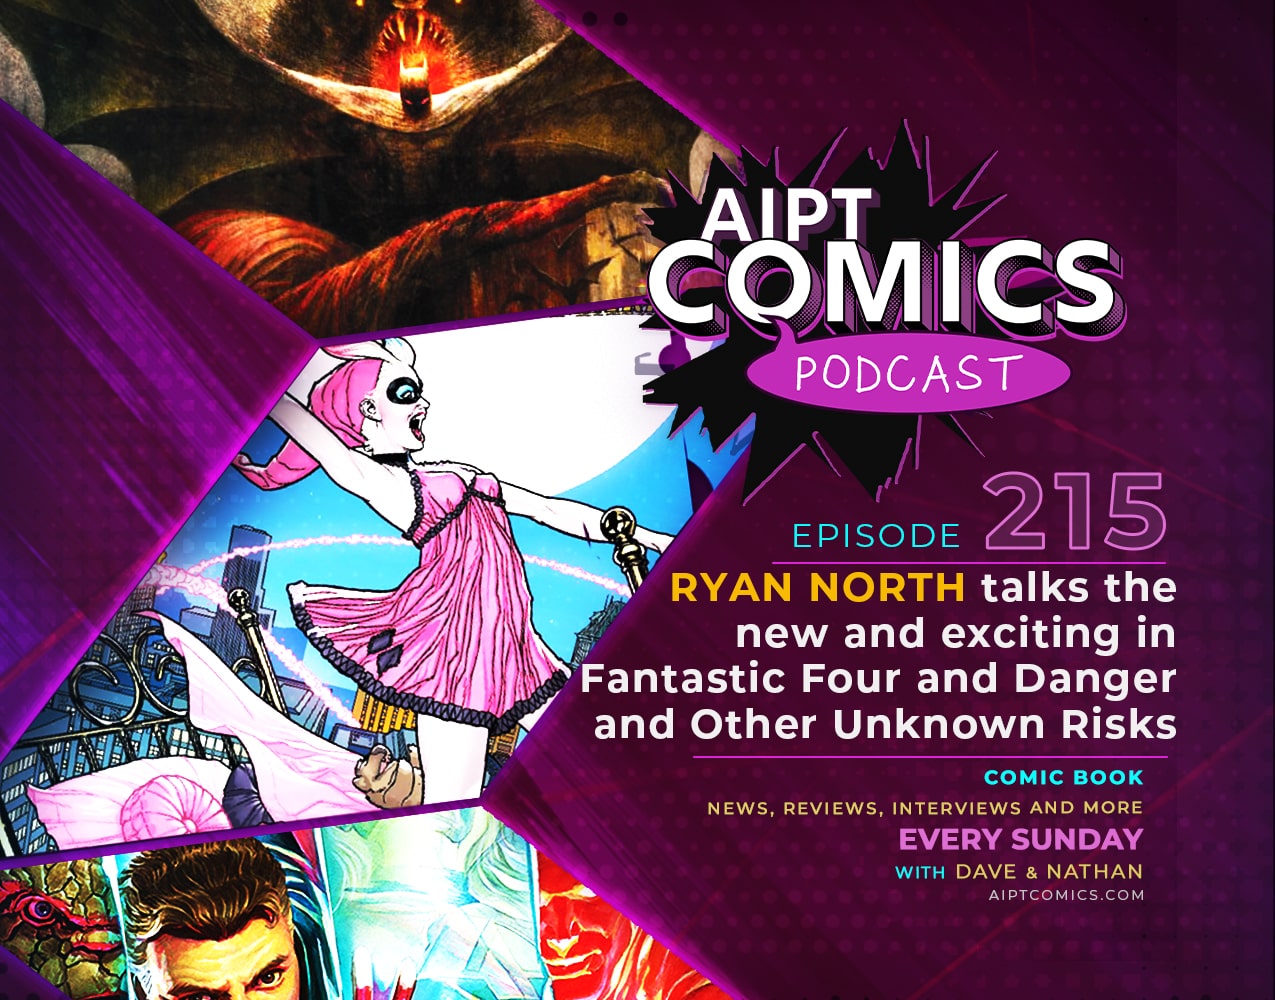 AIPT Comics Podcast episode 215: Ryan North talks the new and exciting in 'Fantastic Four' and 'Danger and Other Unknown Risks'